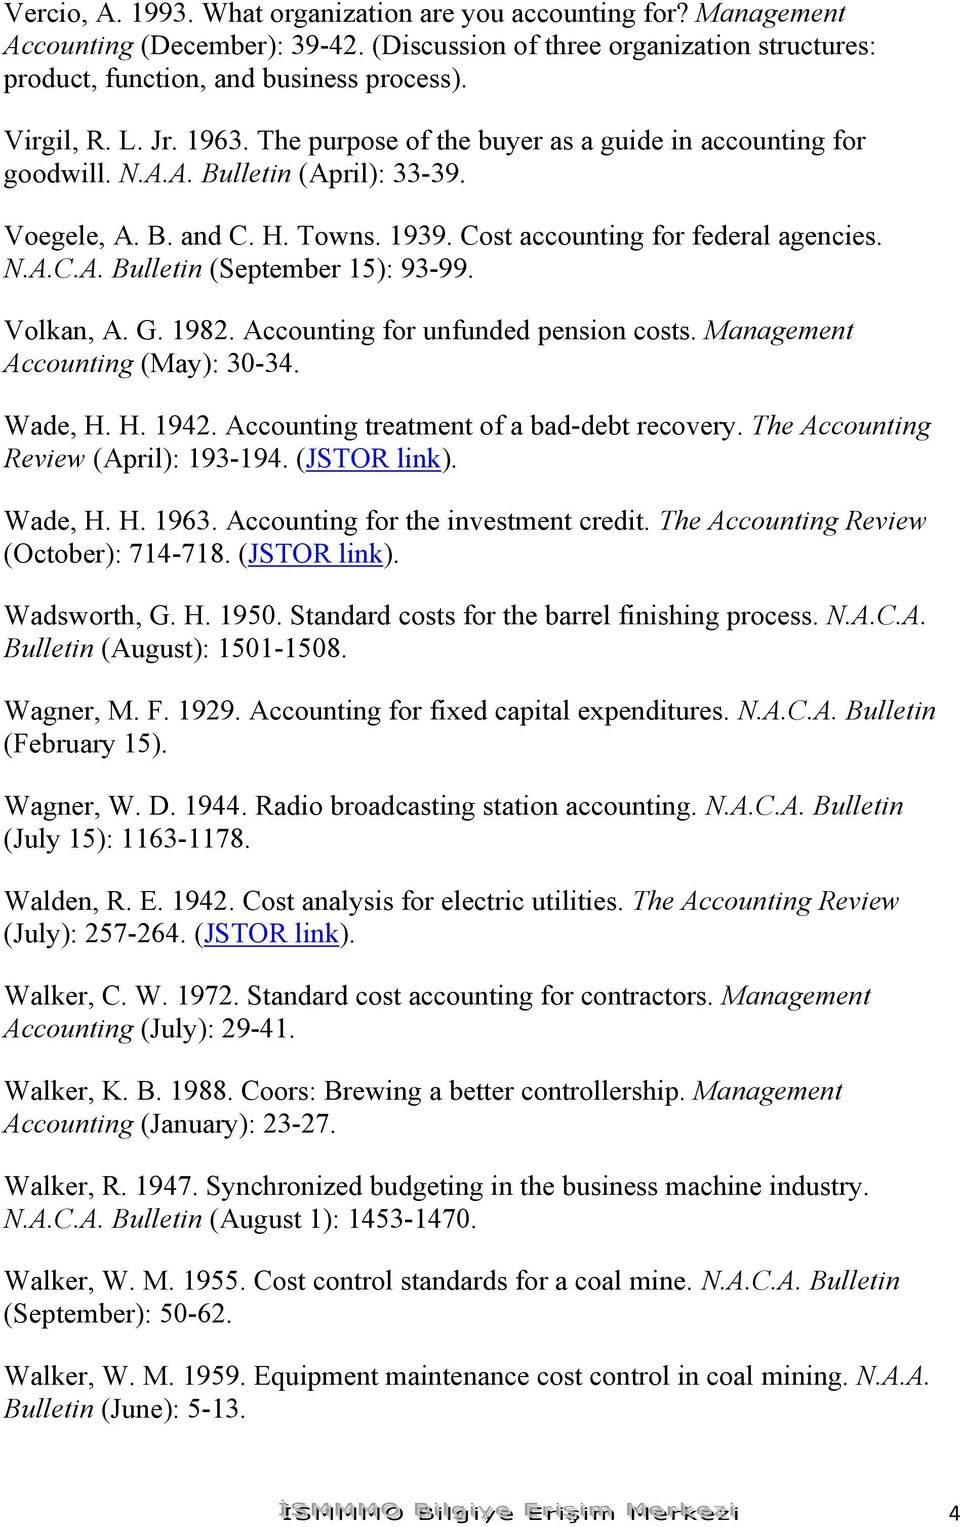 Volkan, A. G. 1982. Accounting for unfunded pension costs. Management Accounting (May): 30-34. Wade, H. H. 1942. Accounting treatment of a bad-debt recovery. The Accounting Review (April): 193-194.